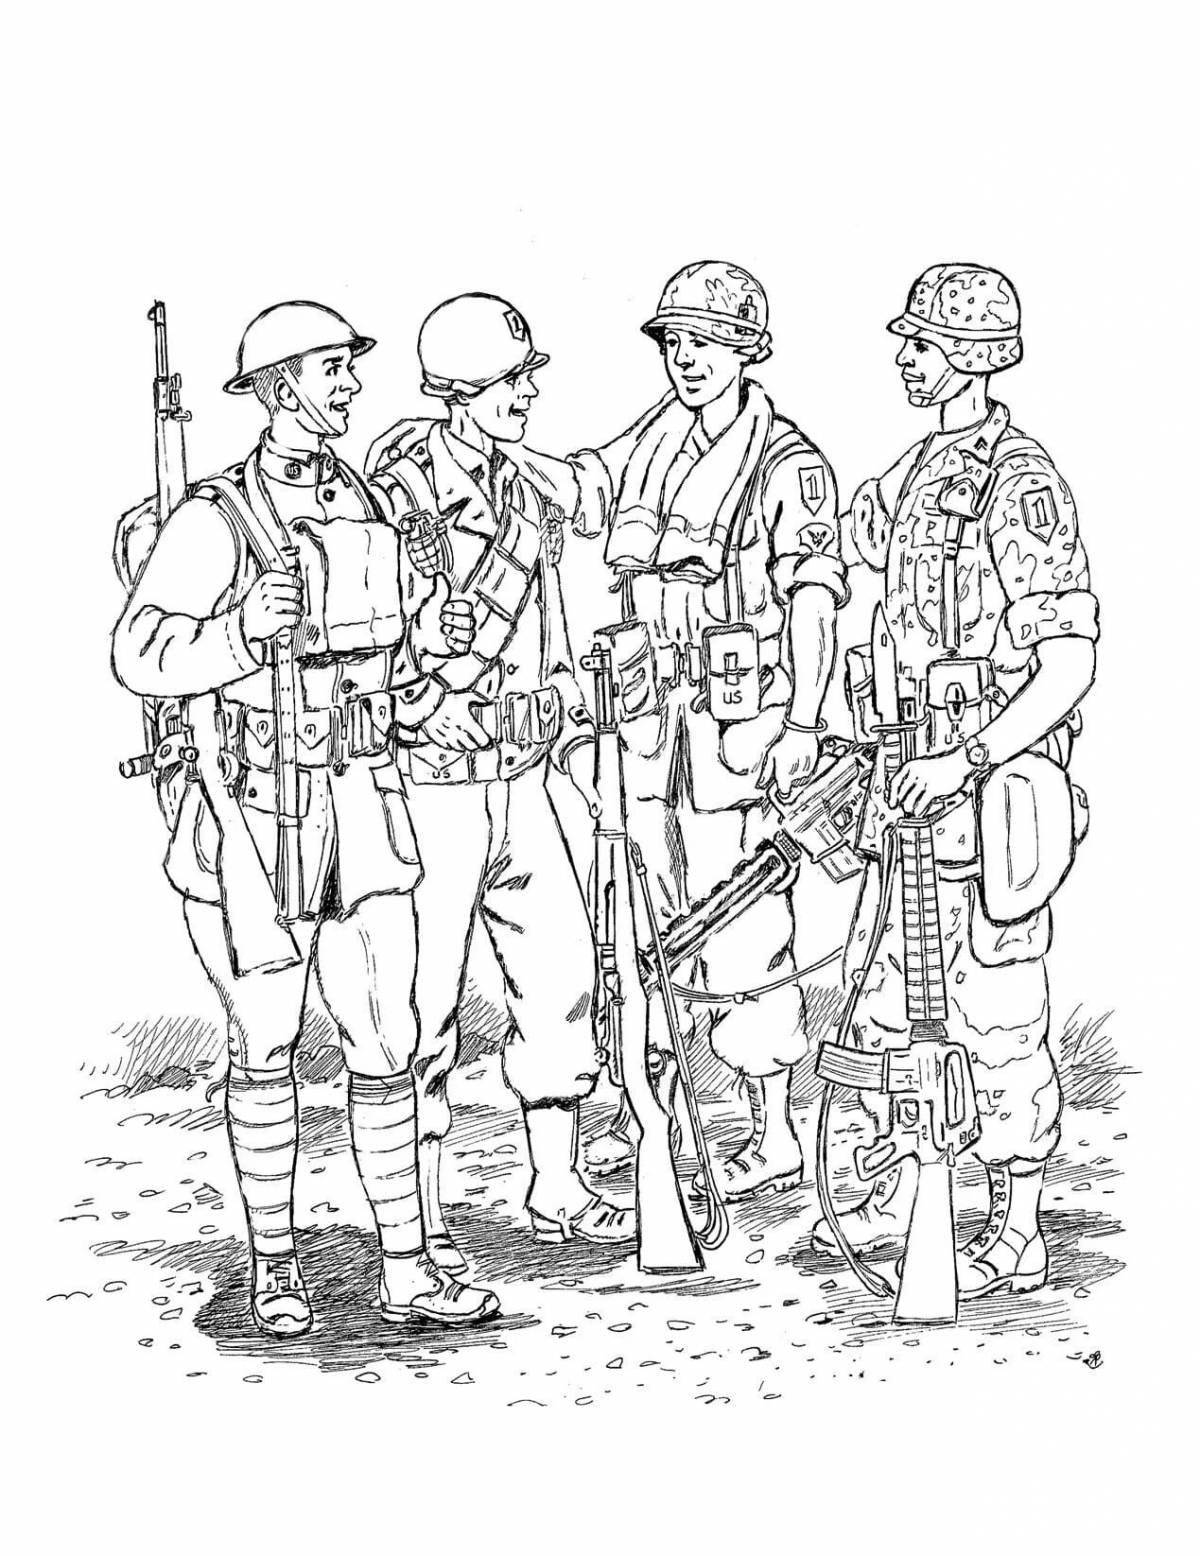 Charming russian soldier coloring pages for kids